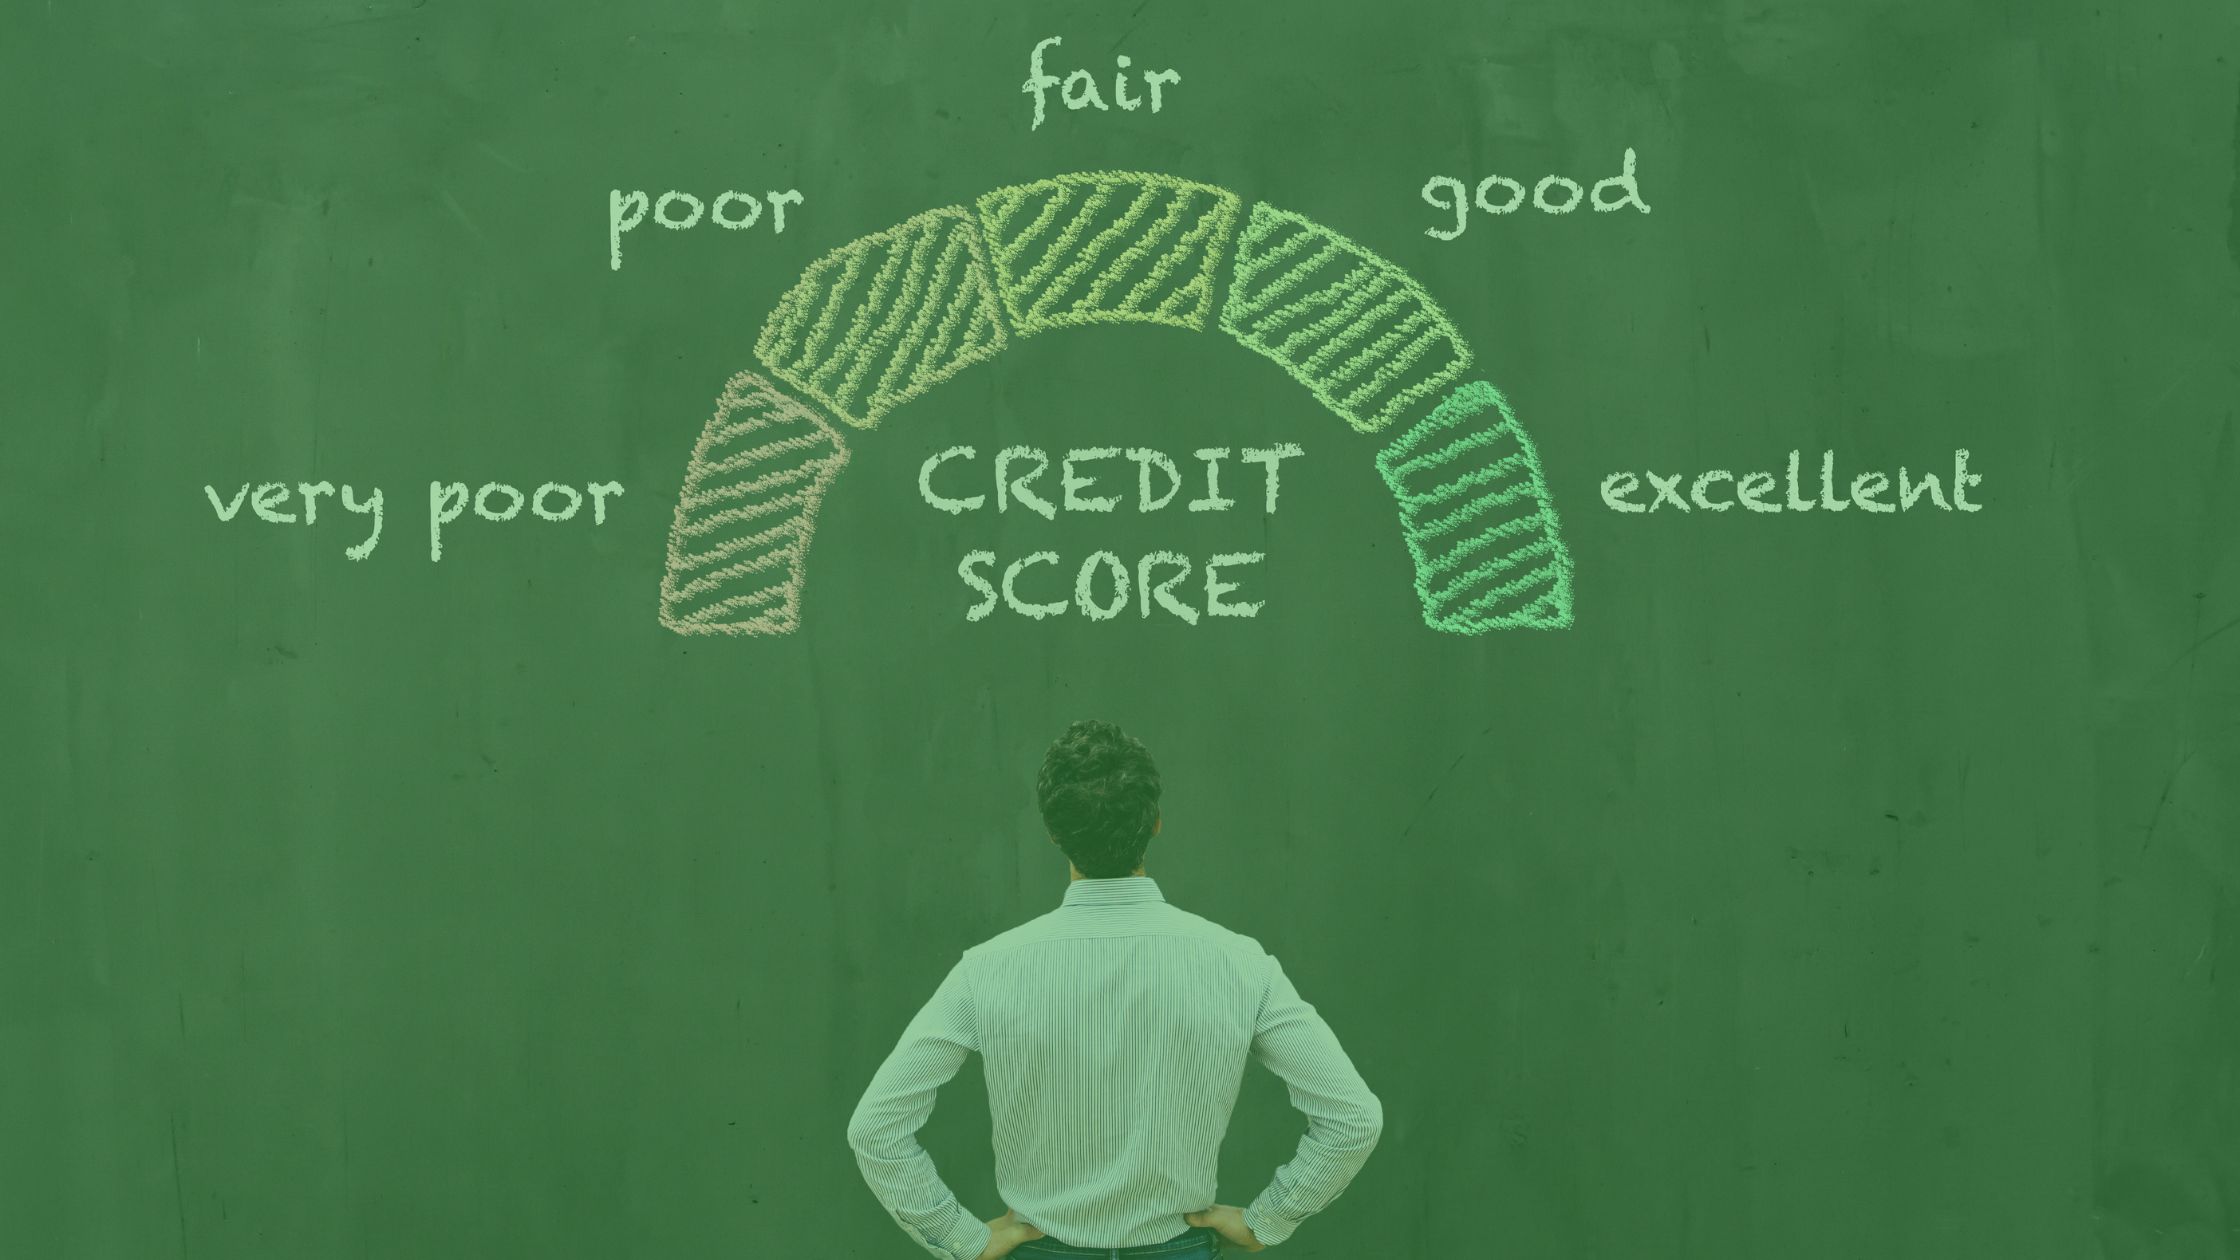 How Can I Improve My Company’s Credit Score?